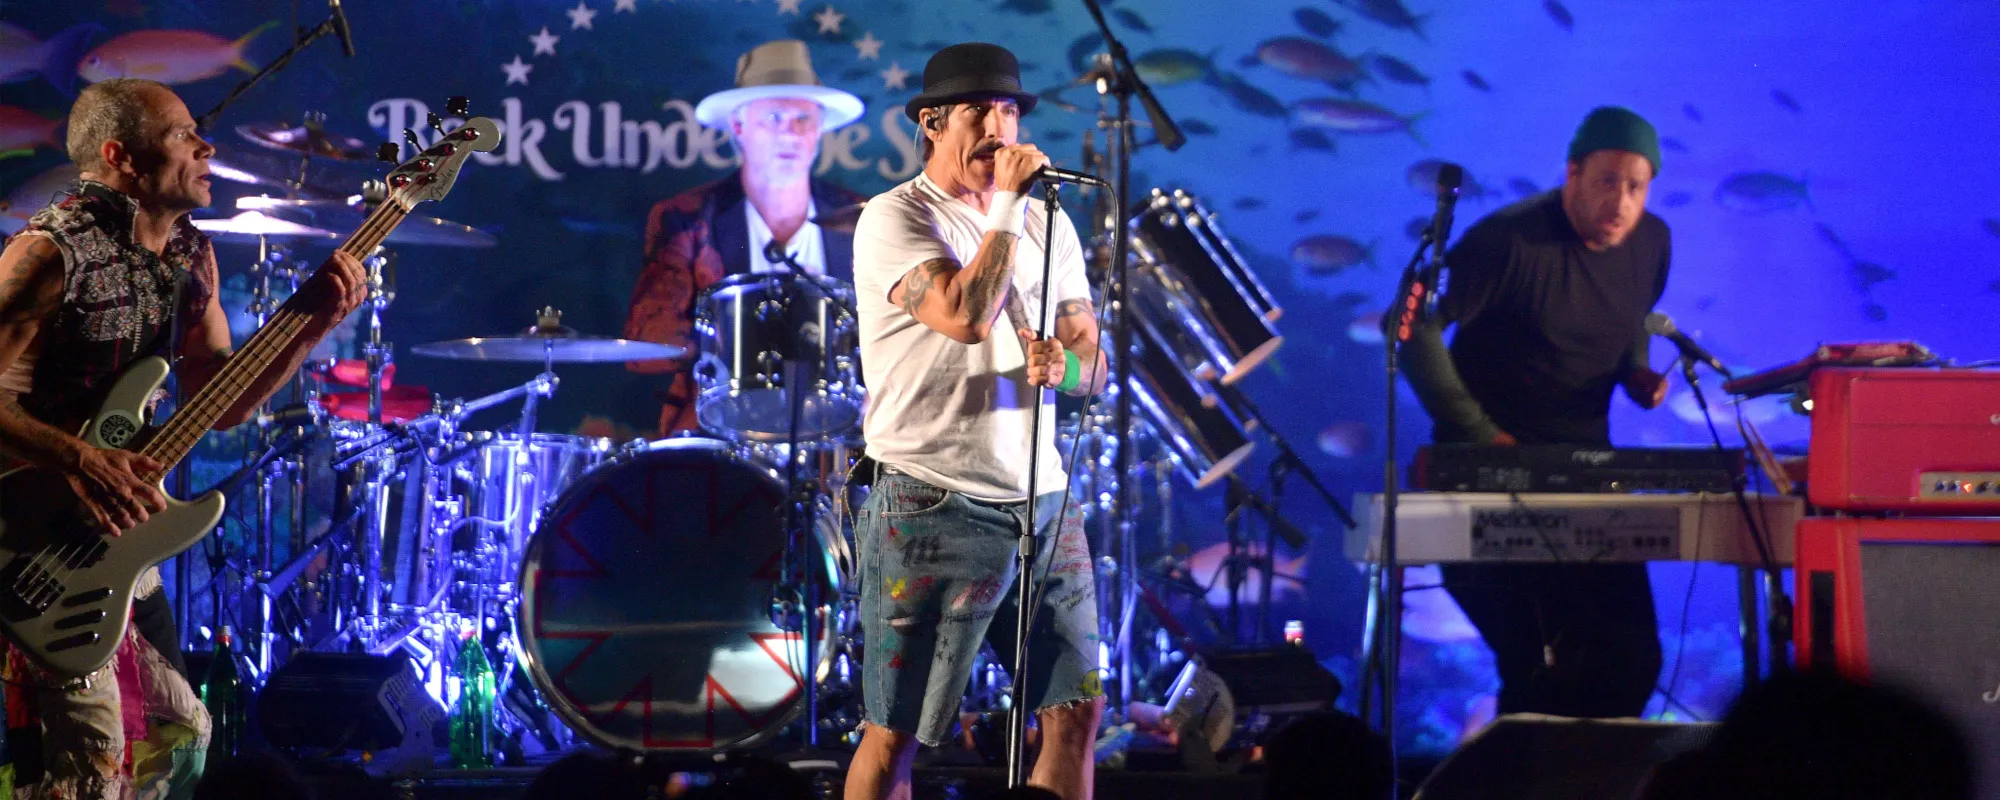 Red Hot Chili Peppers Announce Giant Tour with Special Guests Beck, The Strokes, St. Vincent, Anderson .Paak, Thundercat and More